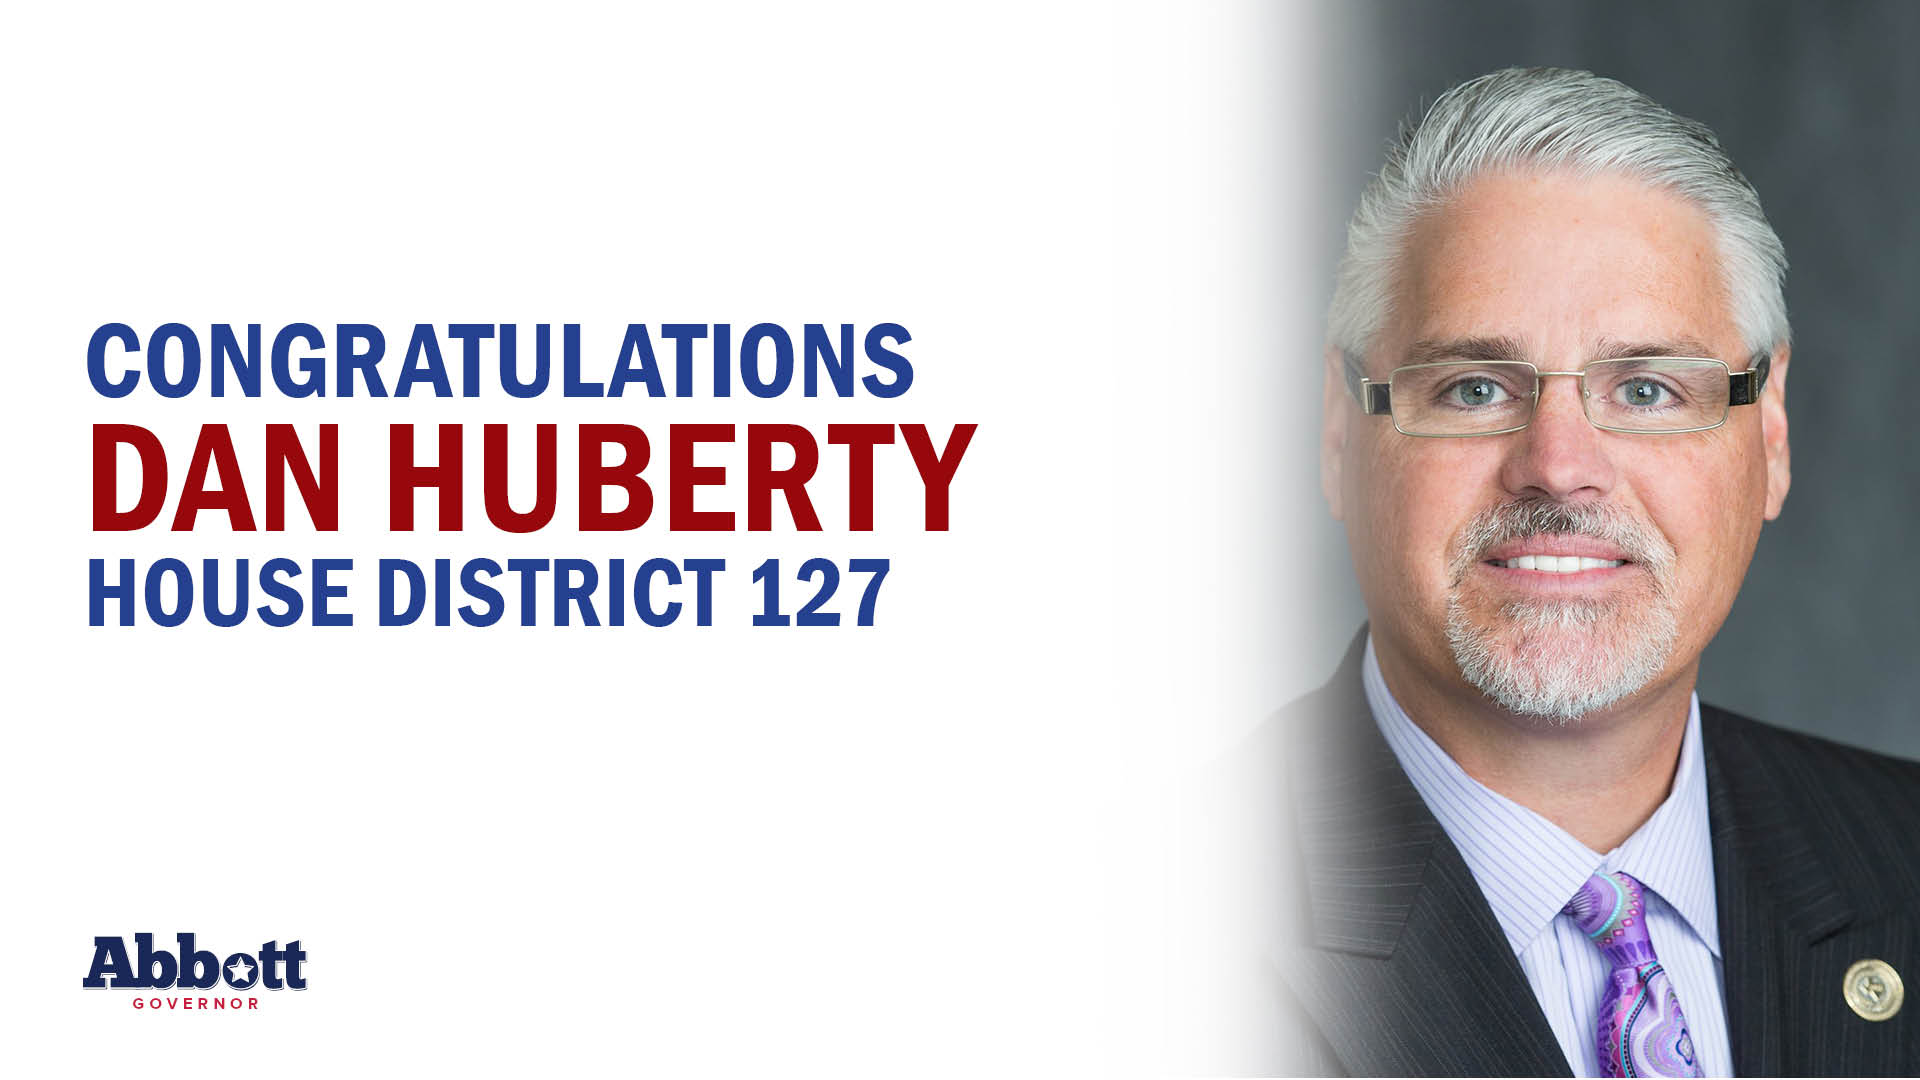 Governor Abbott Lauds Dan Huberty Re-Election Victory In House District 127 ​​​​​​